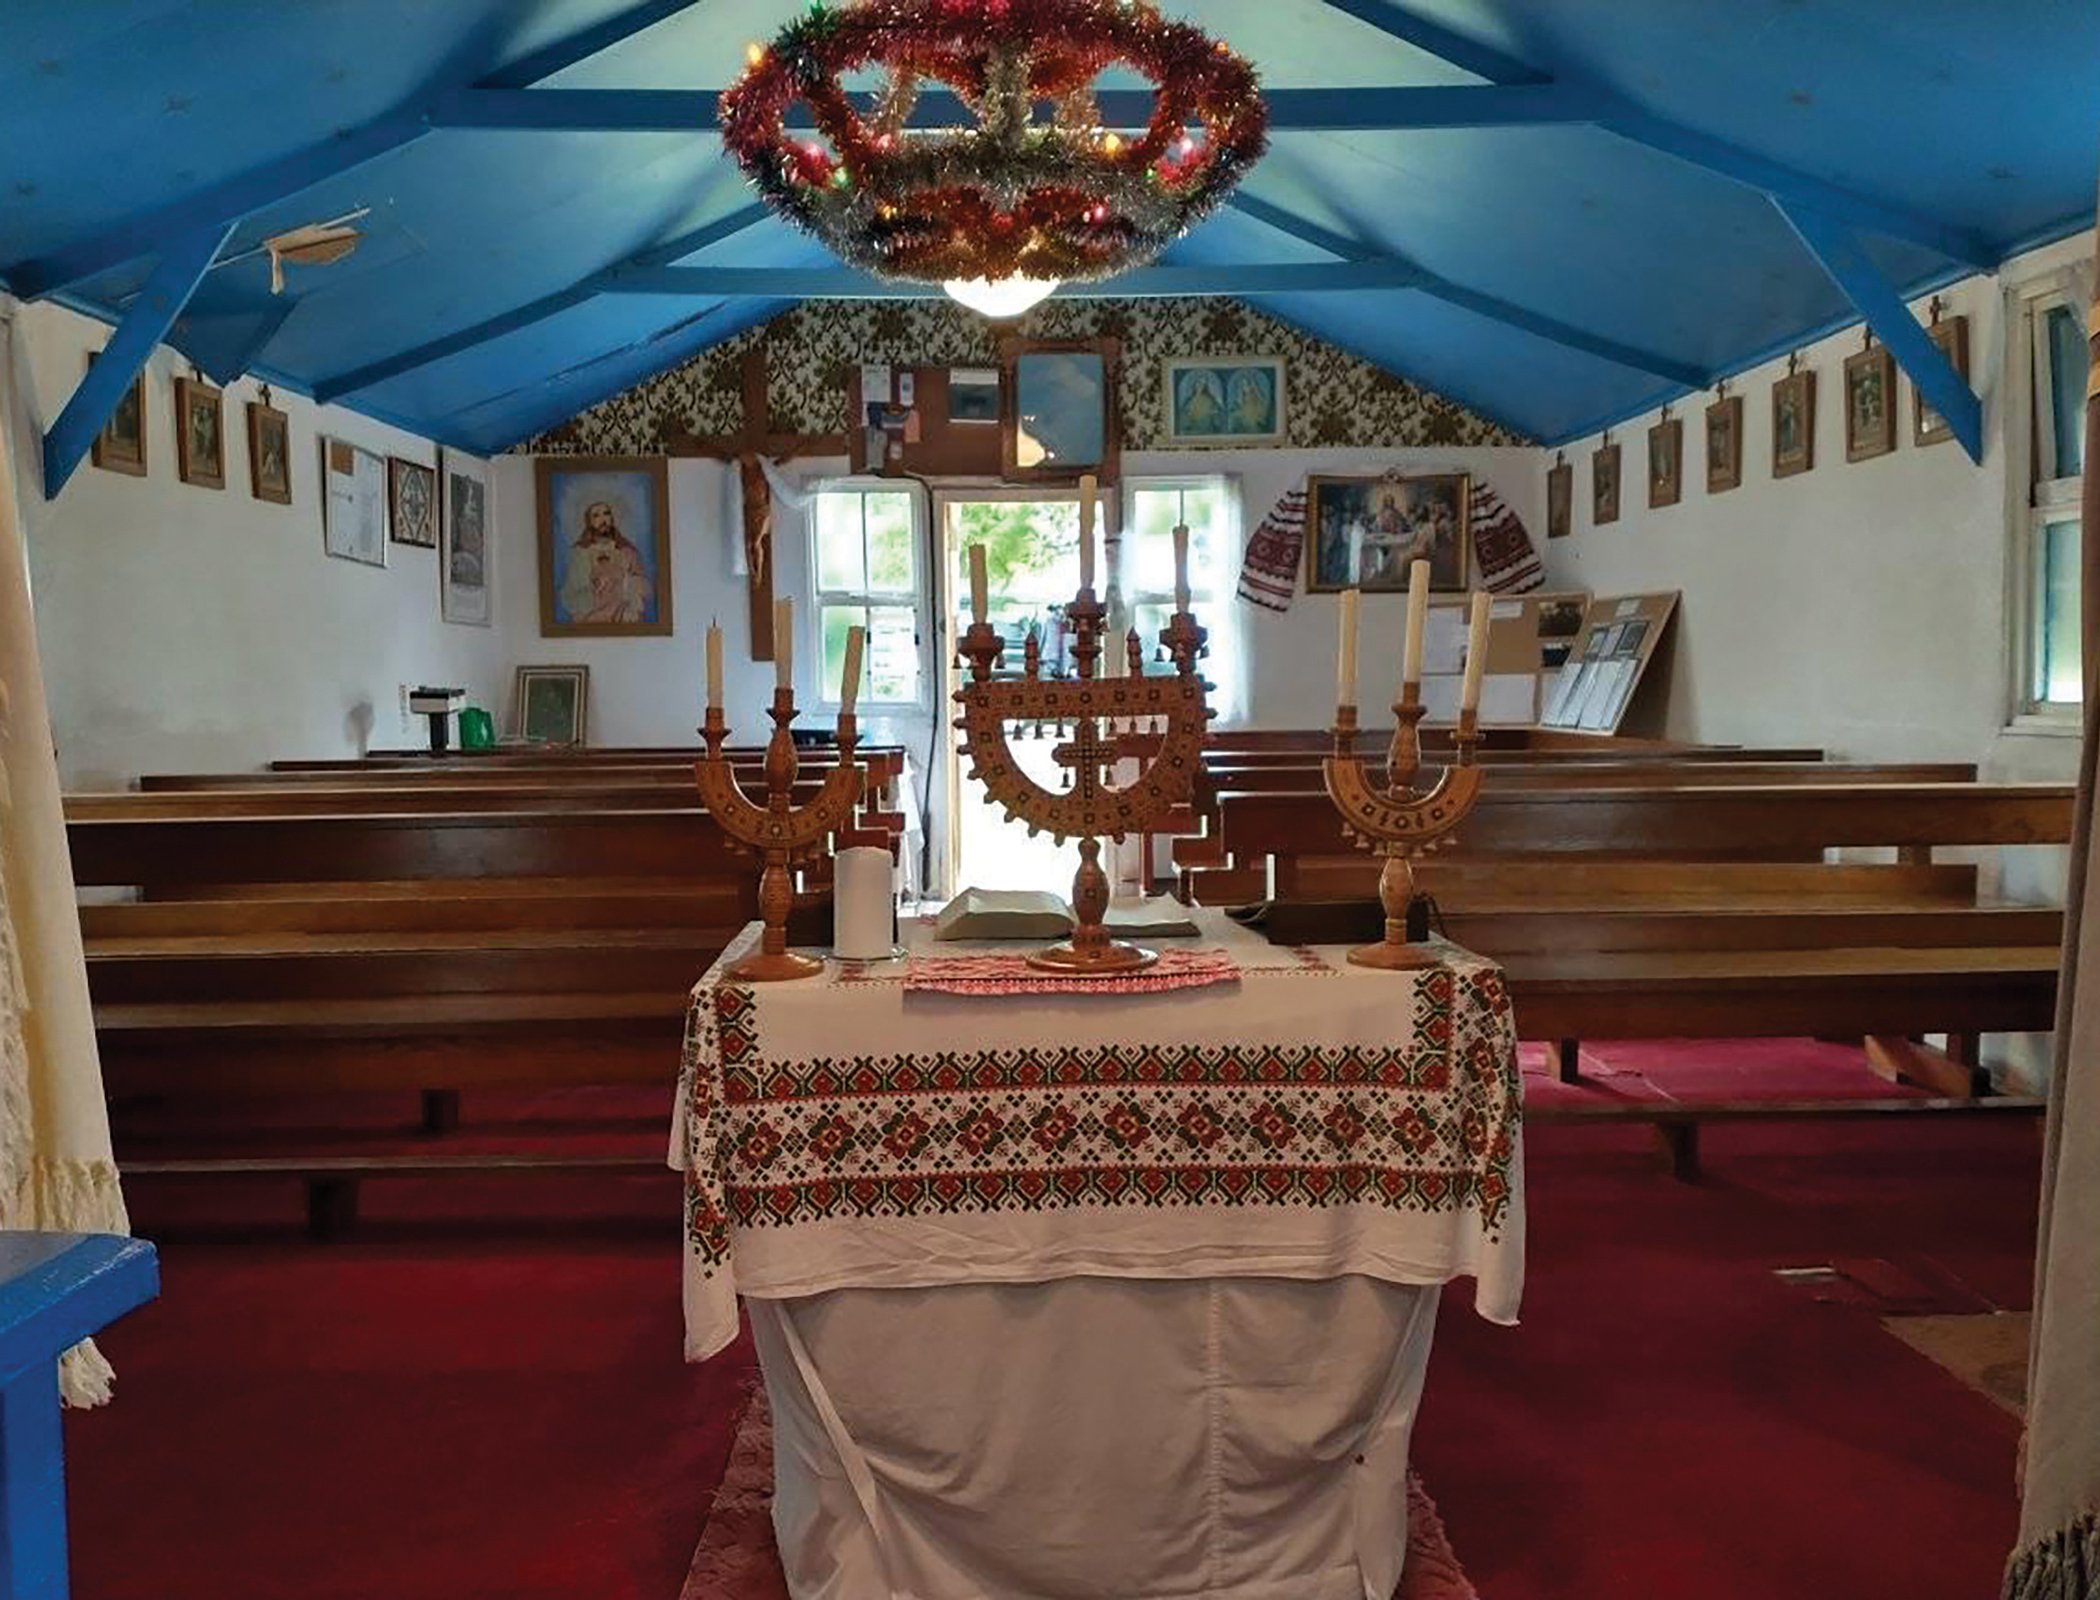 After All: Tiny chapel shows the spirit that sank a huge cruiser